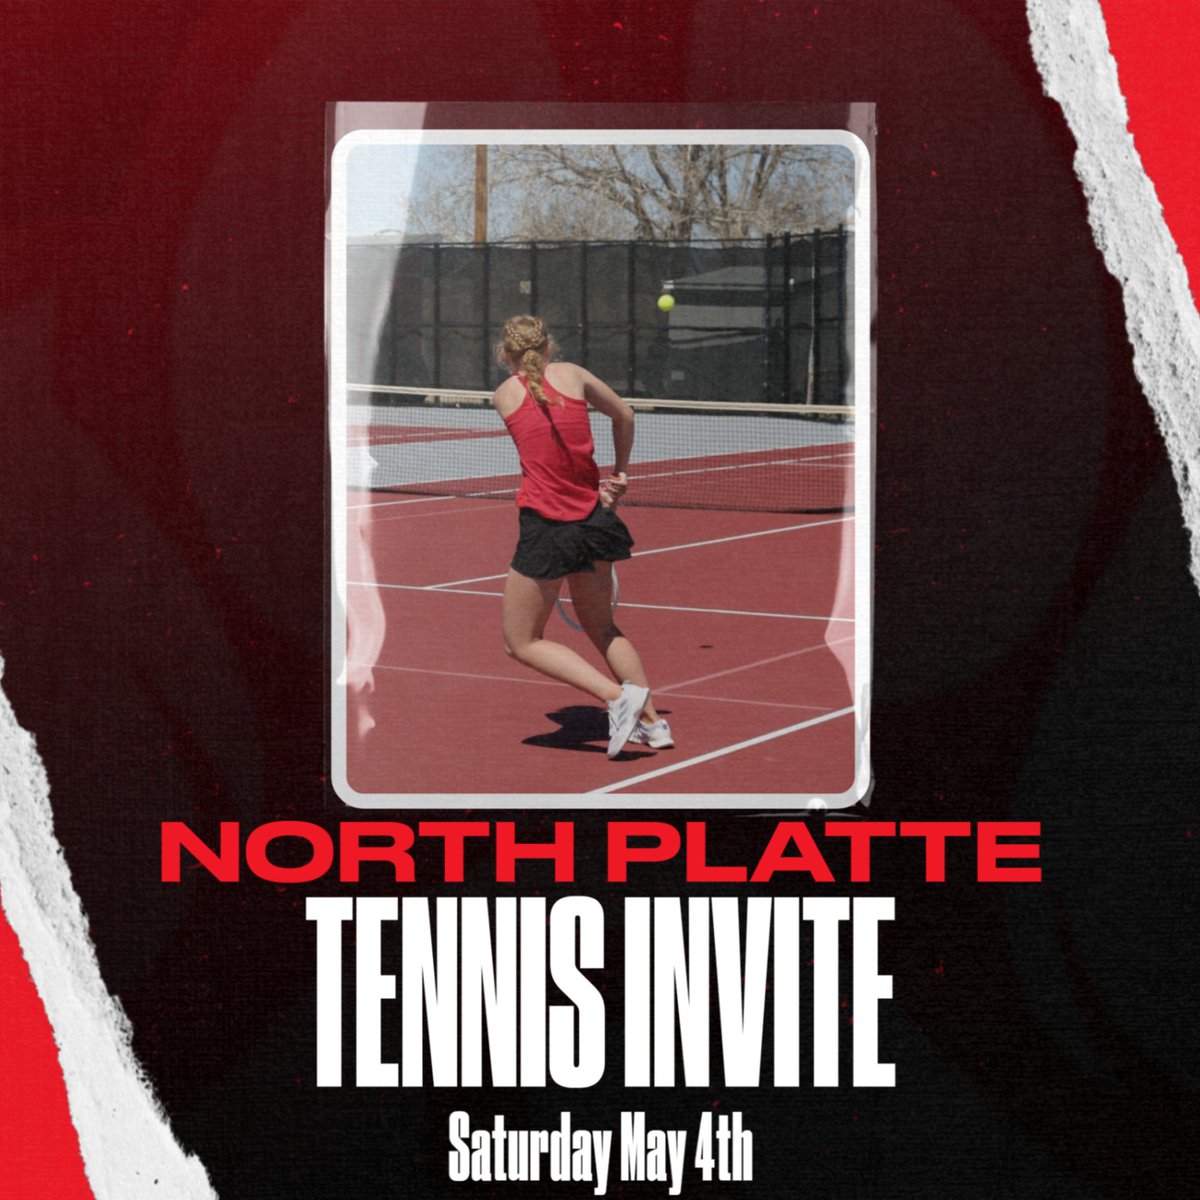 Tennis is in North Platte today for an Varsity Invitational! #LetsGoCats